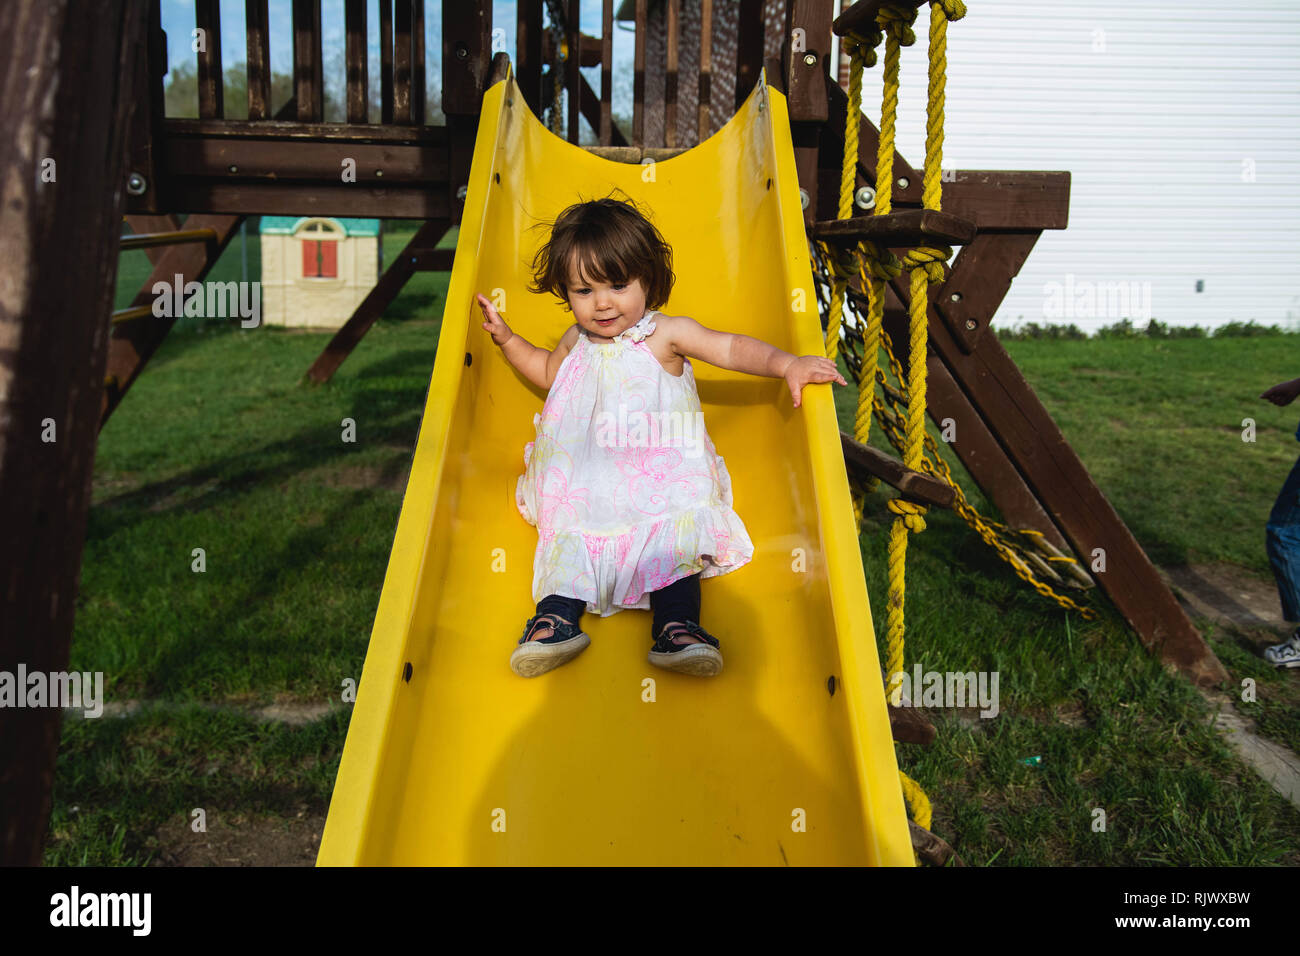 A 2 year old toddler girl slides down a slide at a playground during the summer. Stock Photo